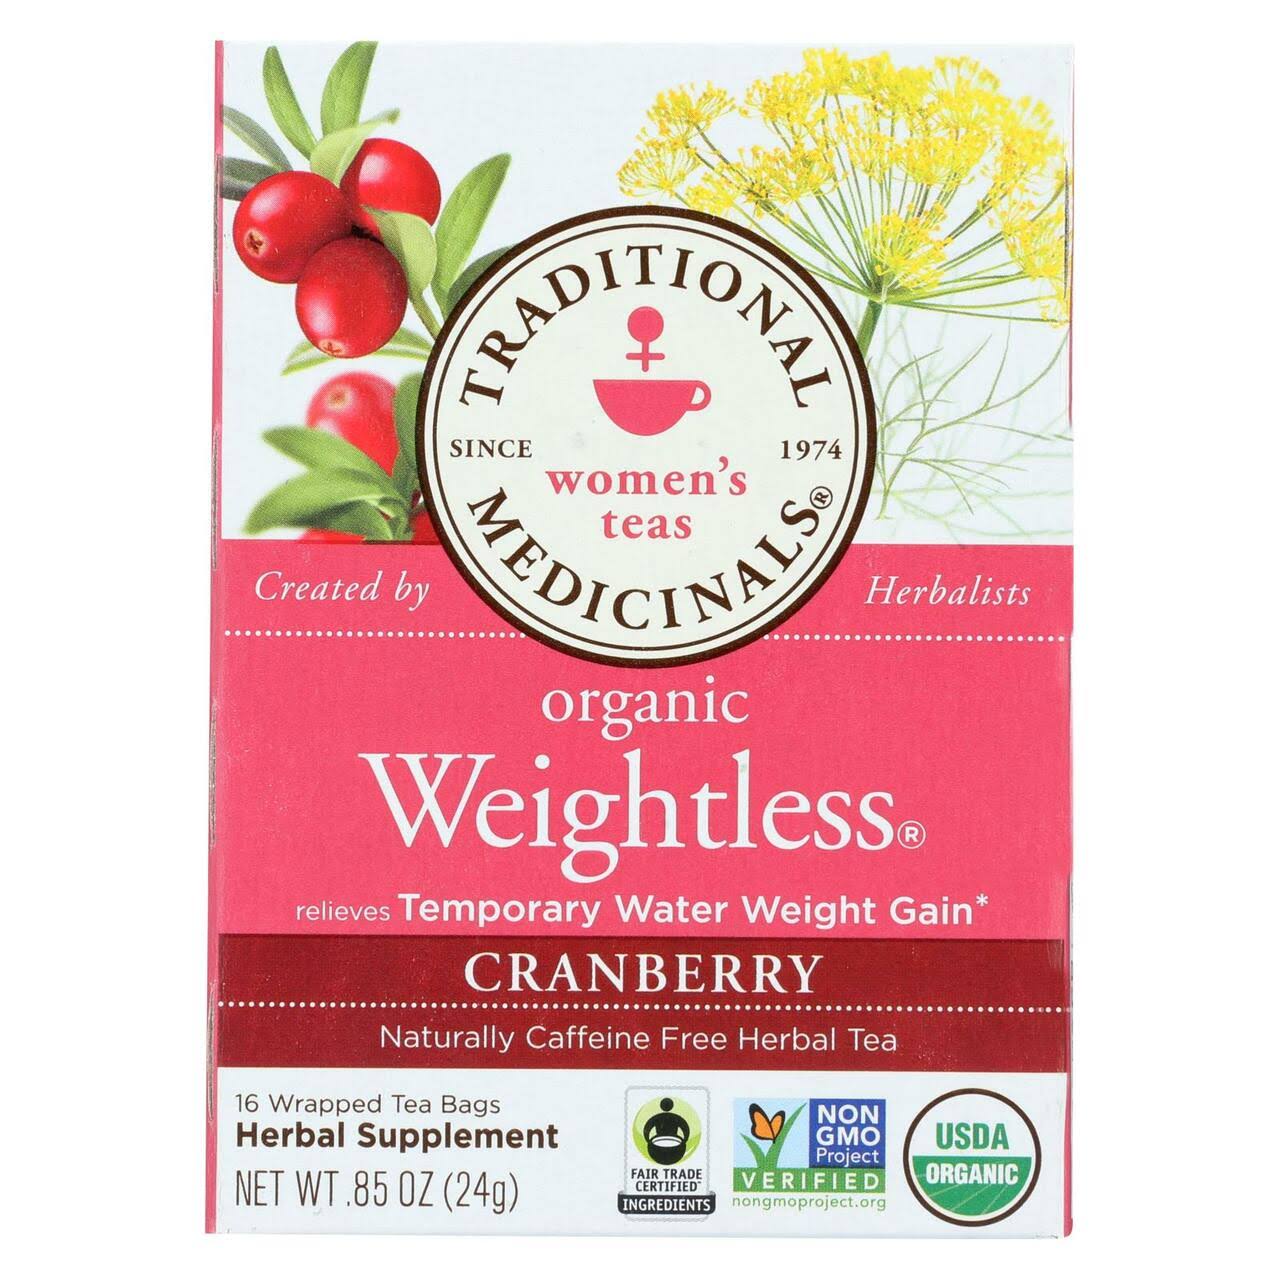 Traditional Medicinals Organic Weightless Tea - Cranberry, 16 Wrapped Tea Bags